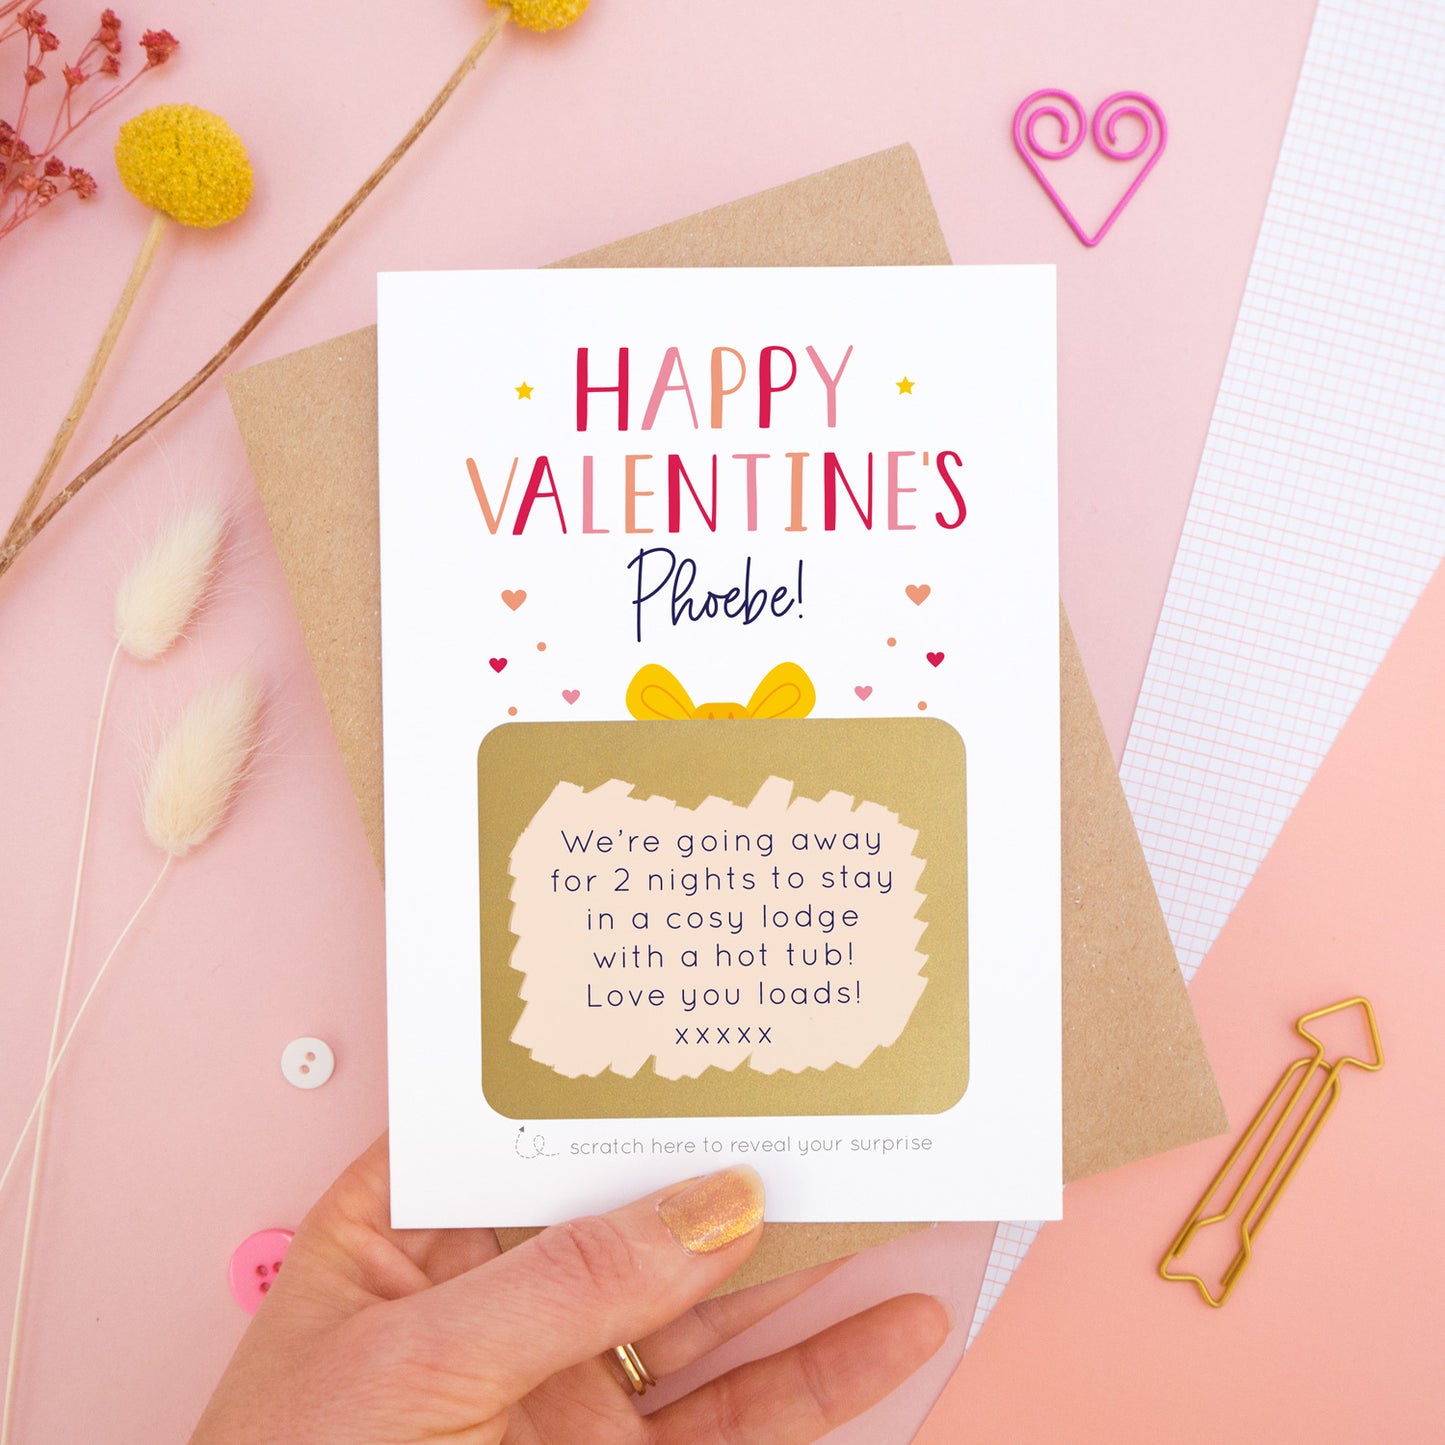 A personalised happy Valentine’s scratch card photographed on a pink background with floral props, paper clips, and buttons. The card has been scratched off to reveal the hidden message and is in the red and peach colour scheme.